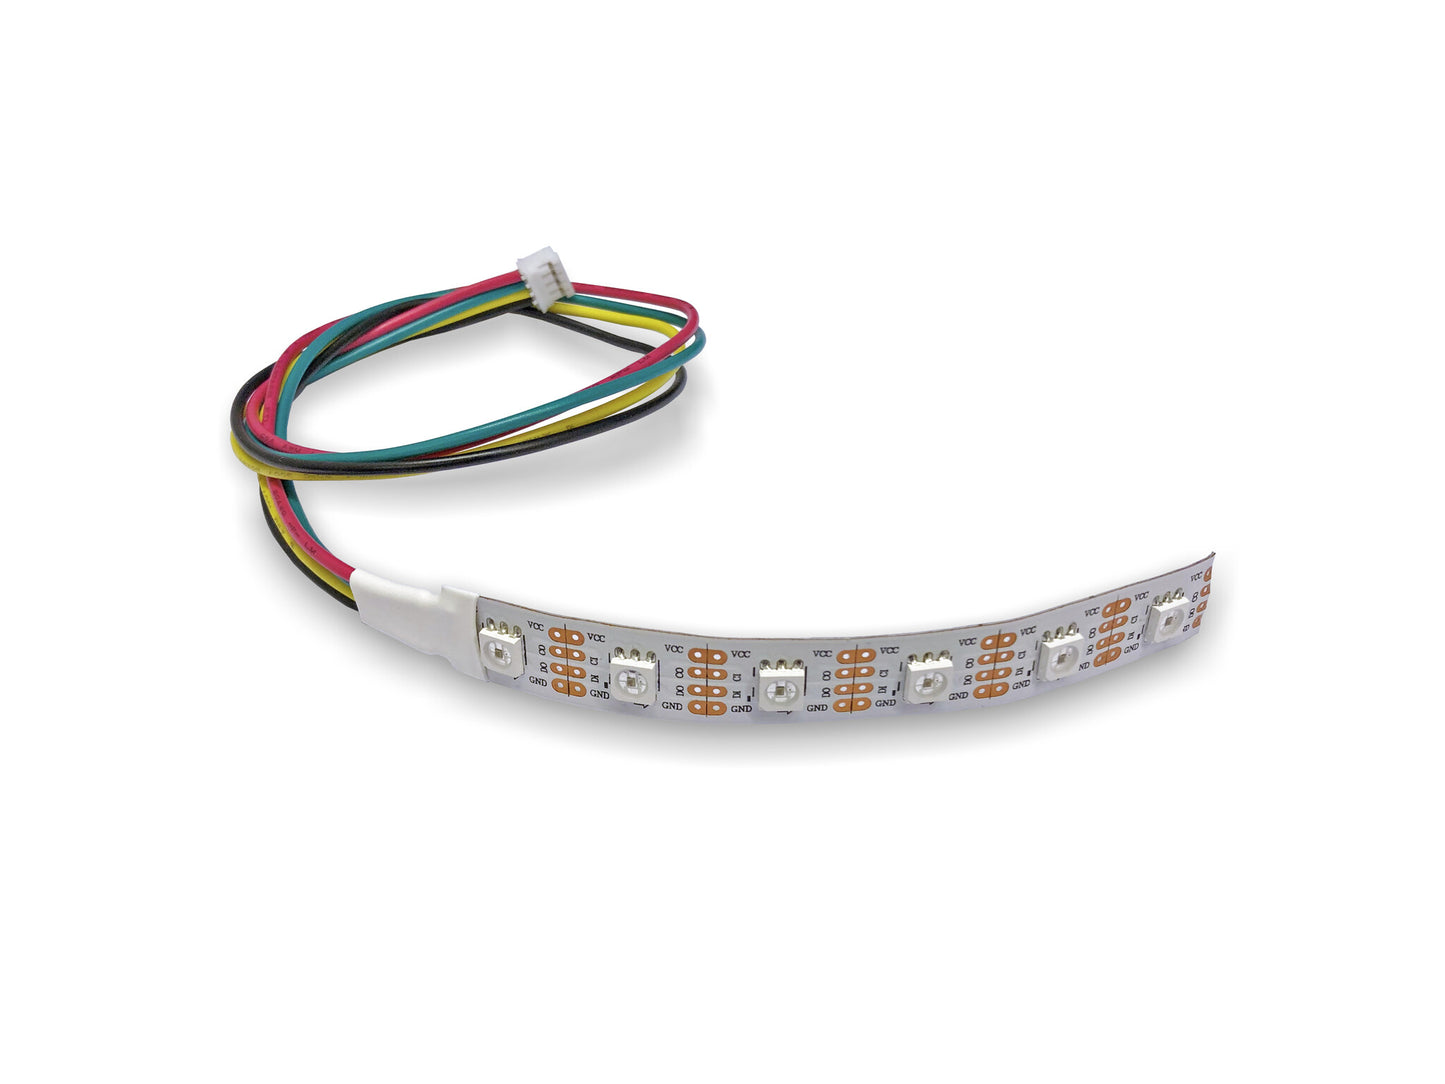 Nexmosphere 200cm LED strip 60L/m Warm White 12V, 180cm cable DC 2.1mm connector 90'angle